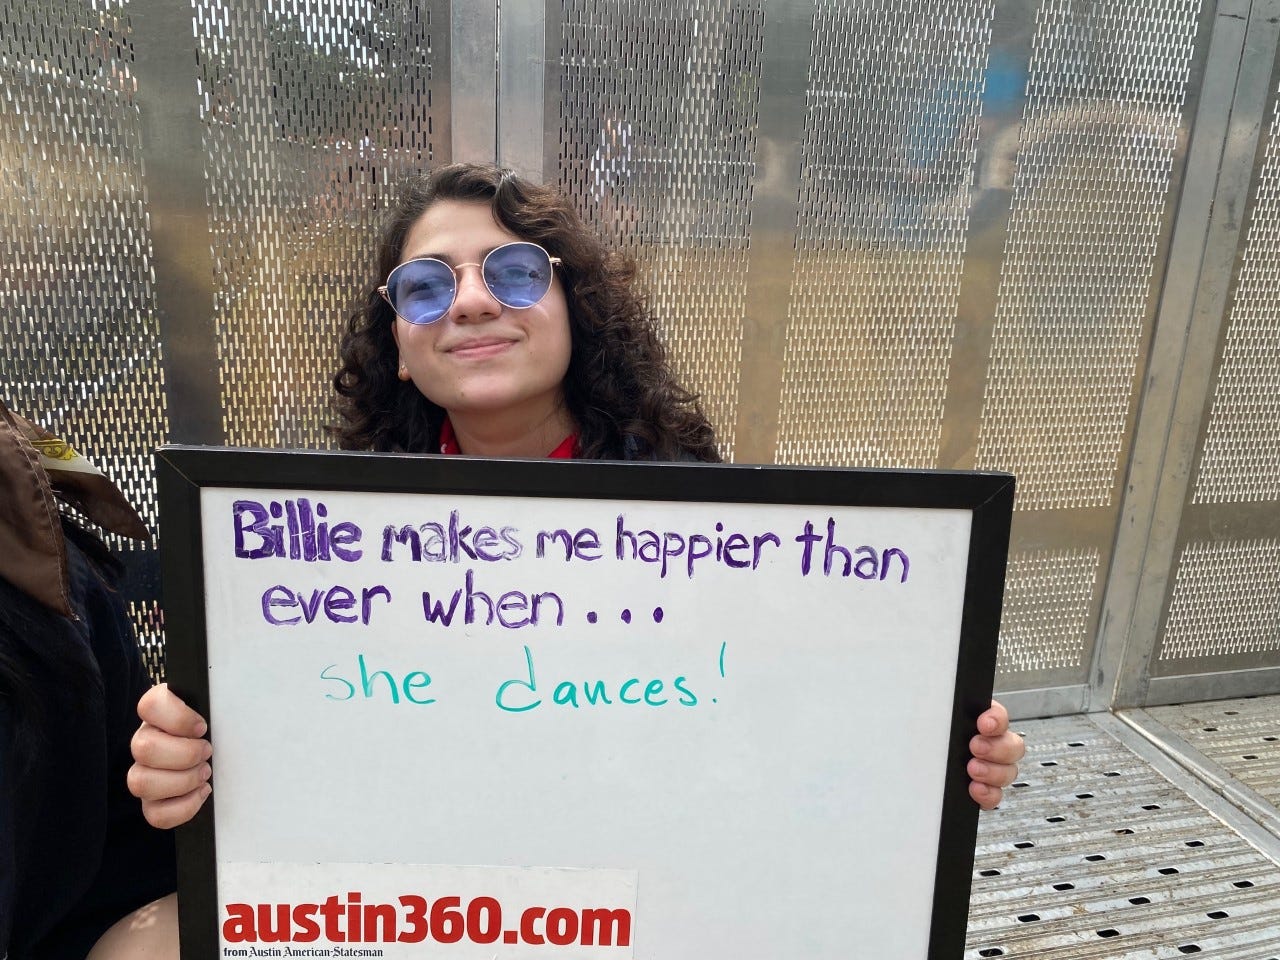 Regina Graells, 21, waiting for the Billie Eilish show on Saturday Oct. 2, 2021. She is from Austin, Texas.